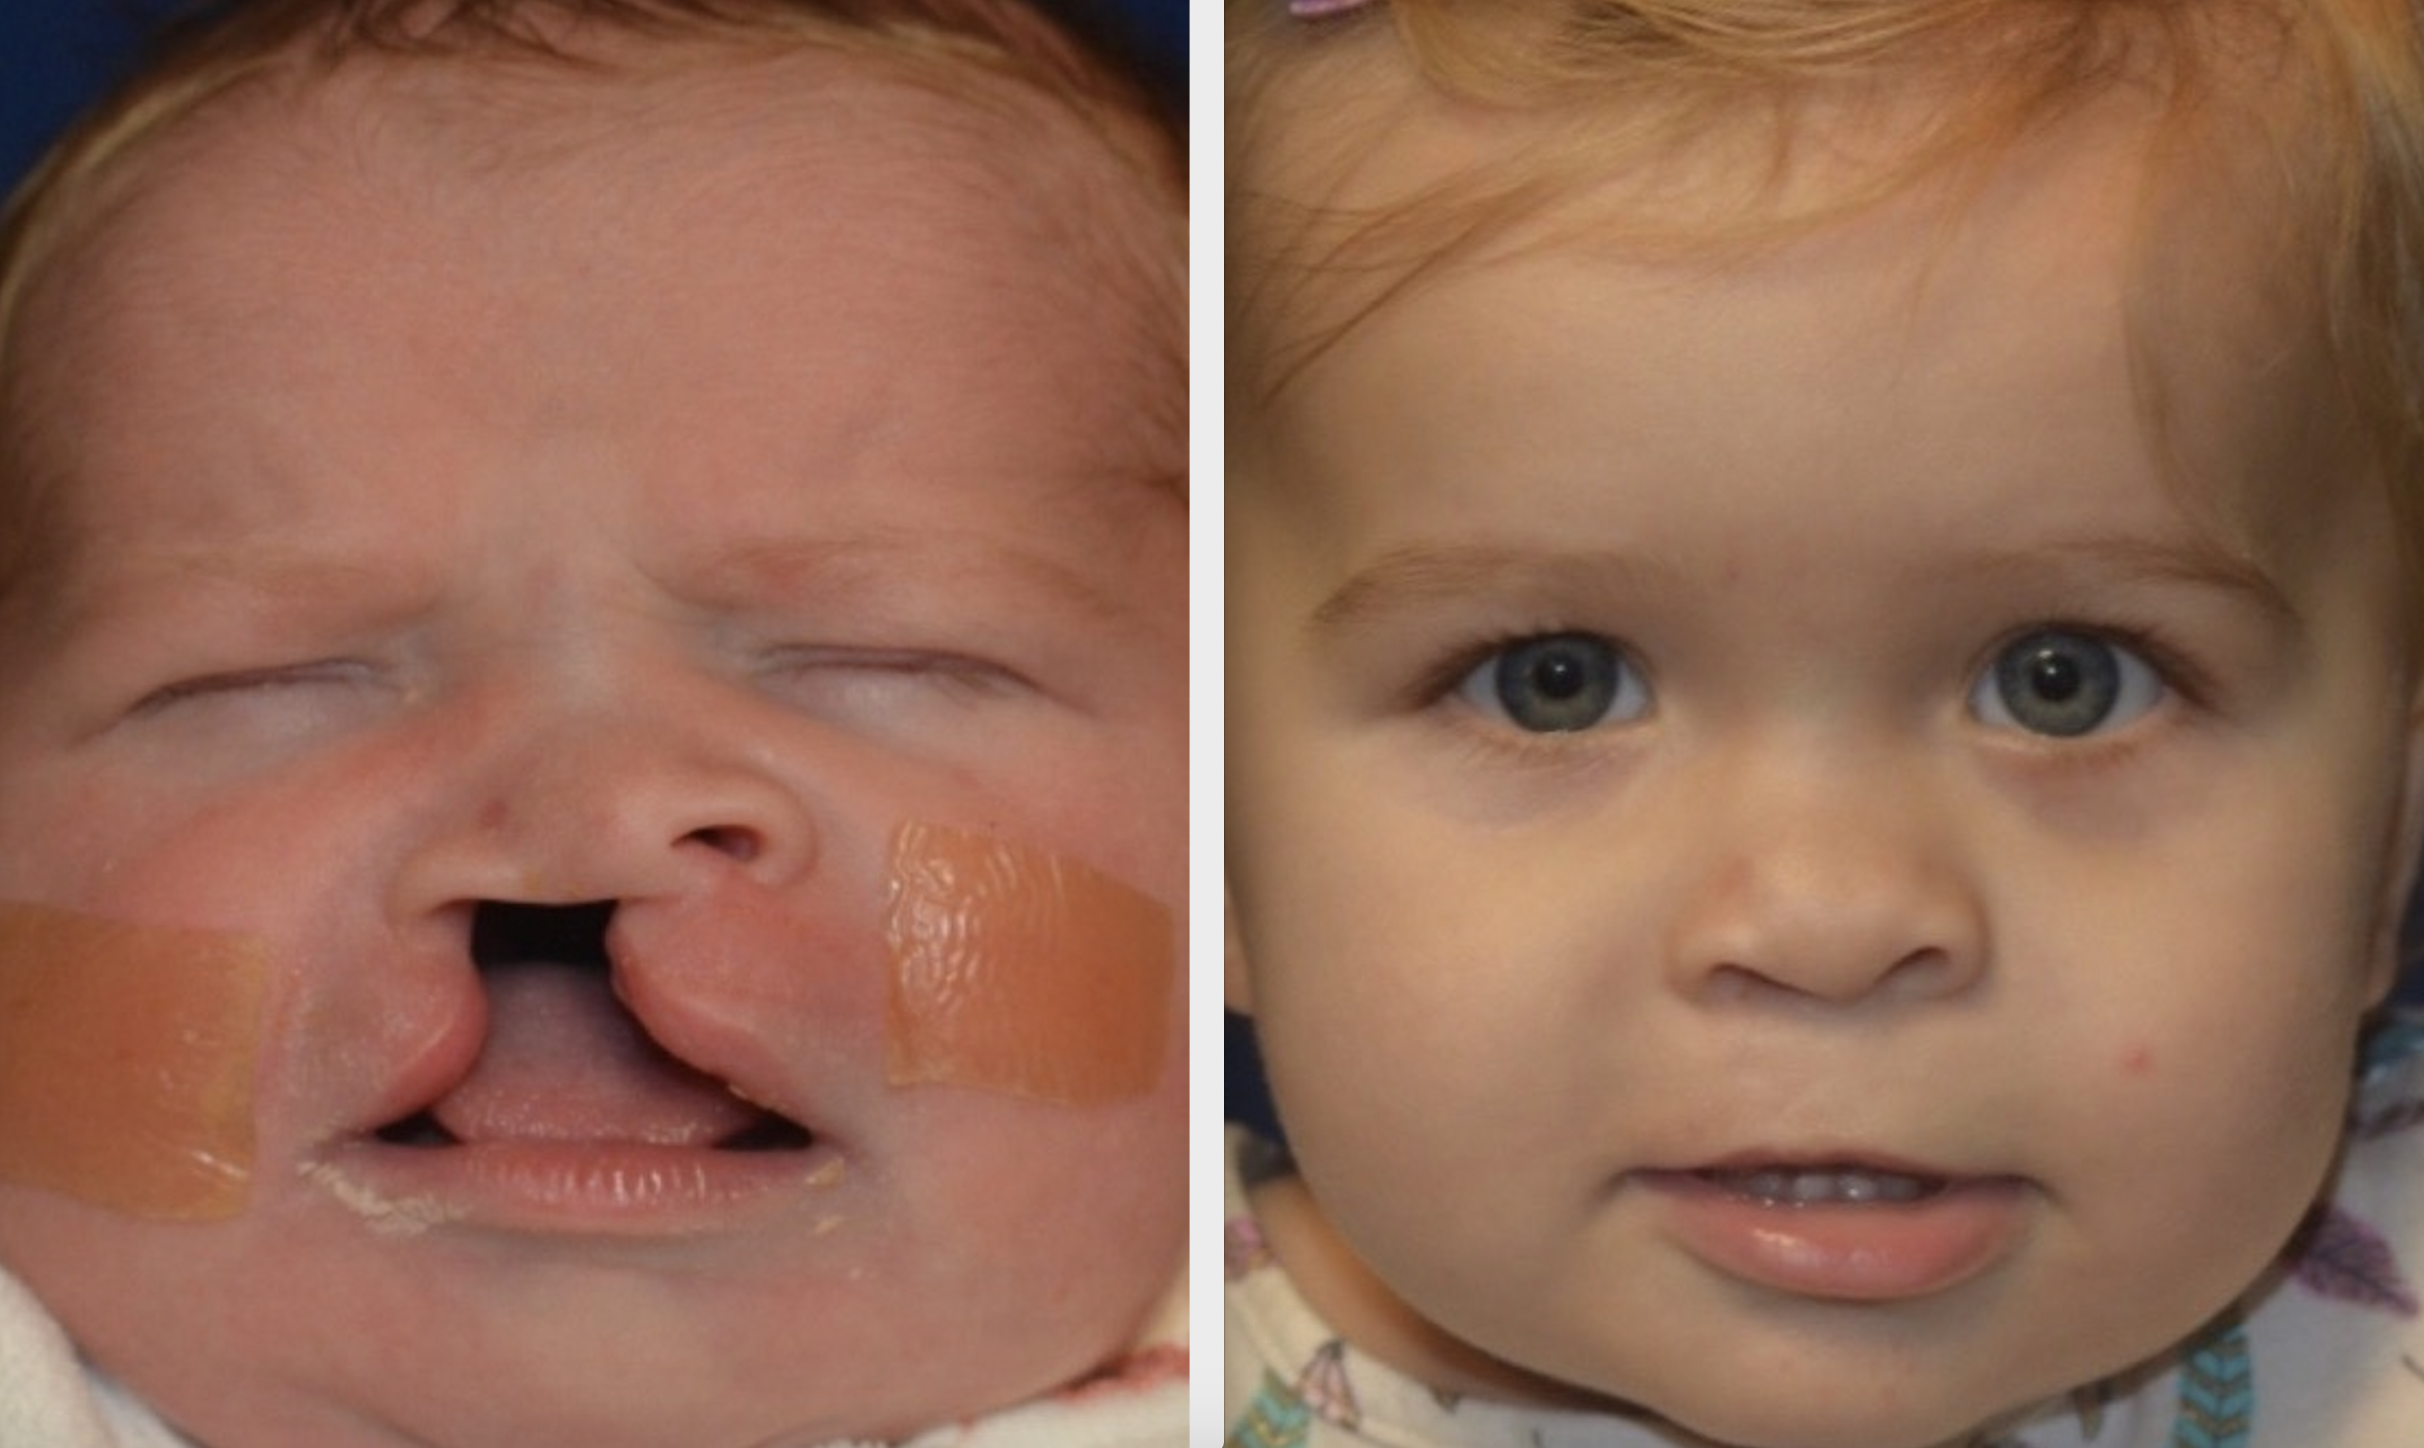 A patient of Dr. Hammoudeh who underwent ECLR at 2 weeks of age, pictured on the right 1 year after surgery.